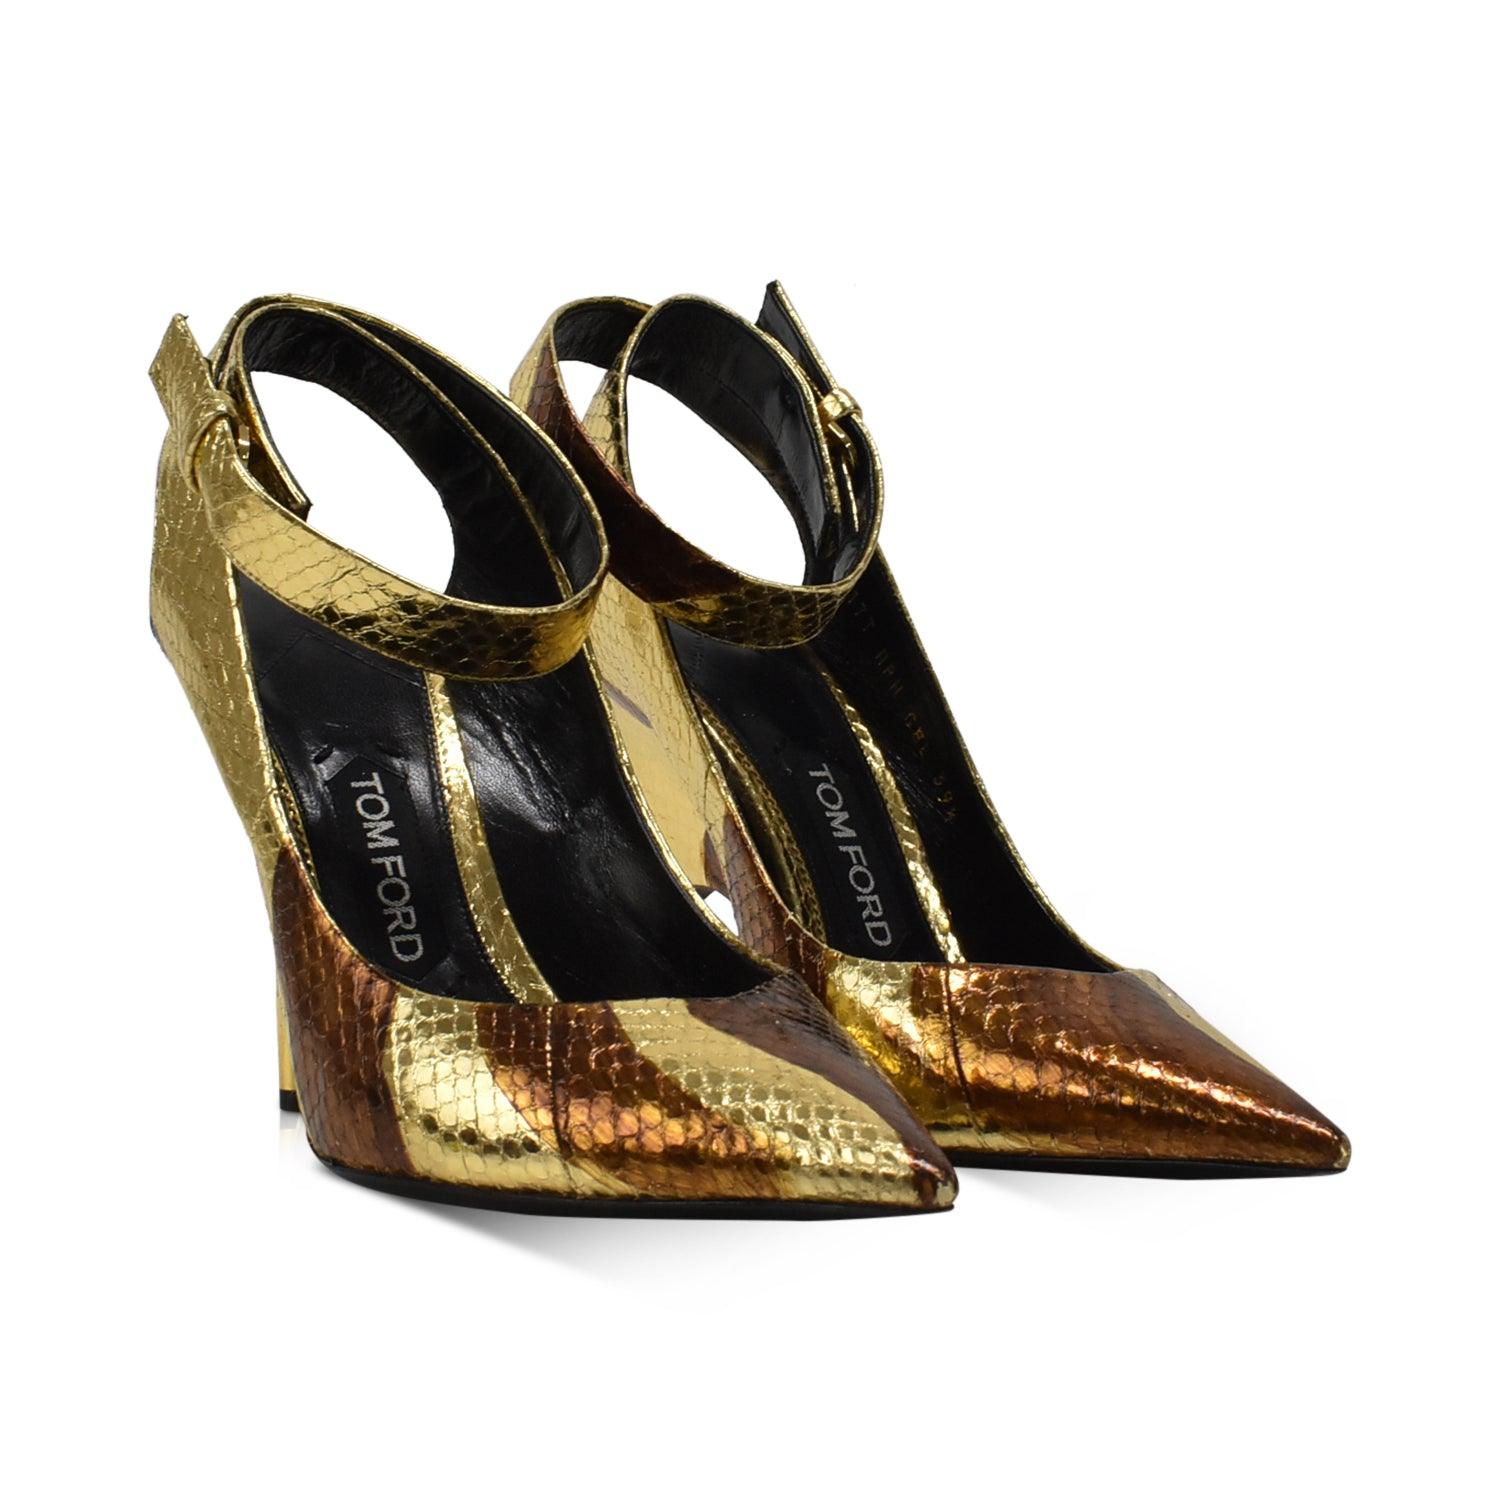 Tom Ford Heels - Women's 39.5 - Fashionably Yours